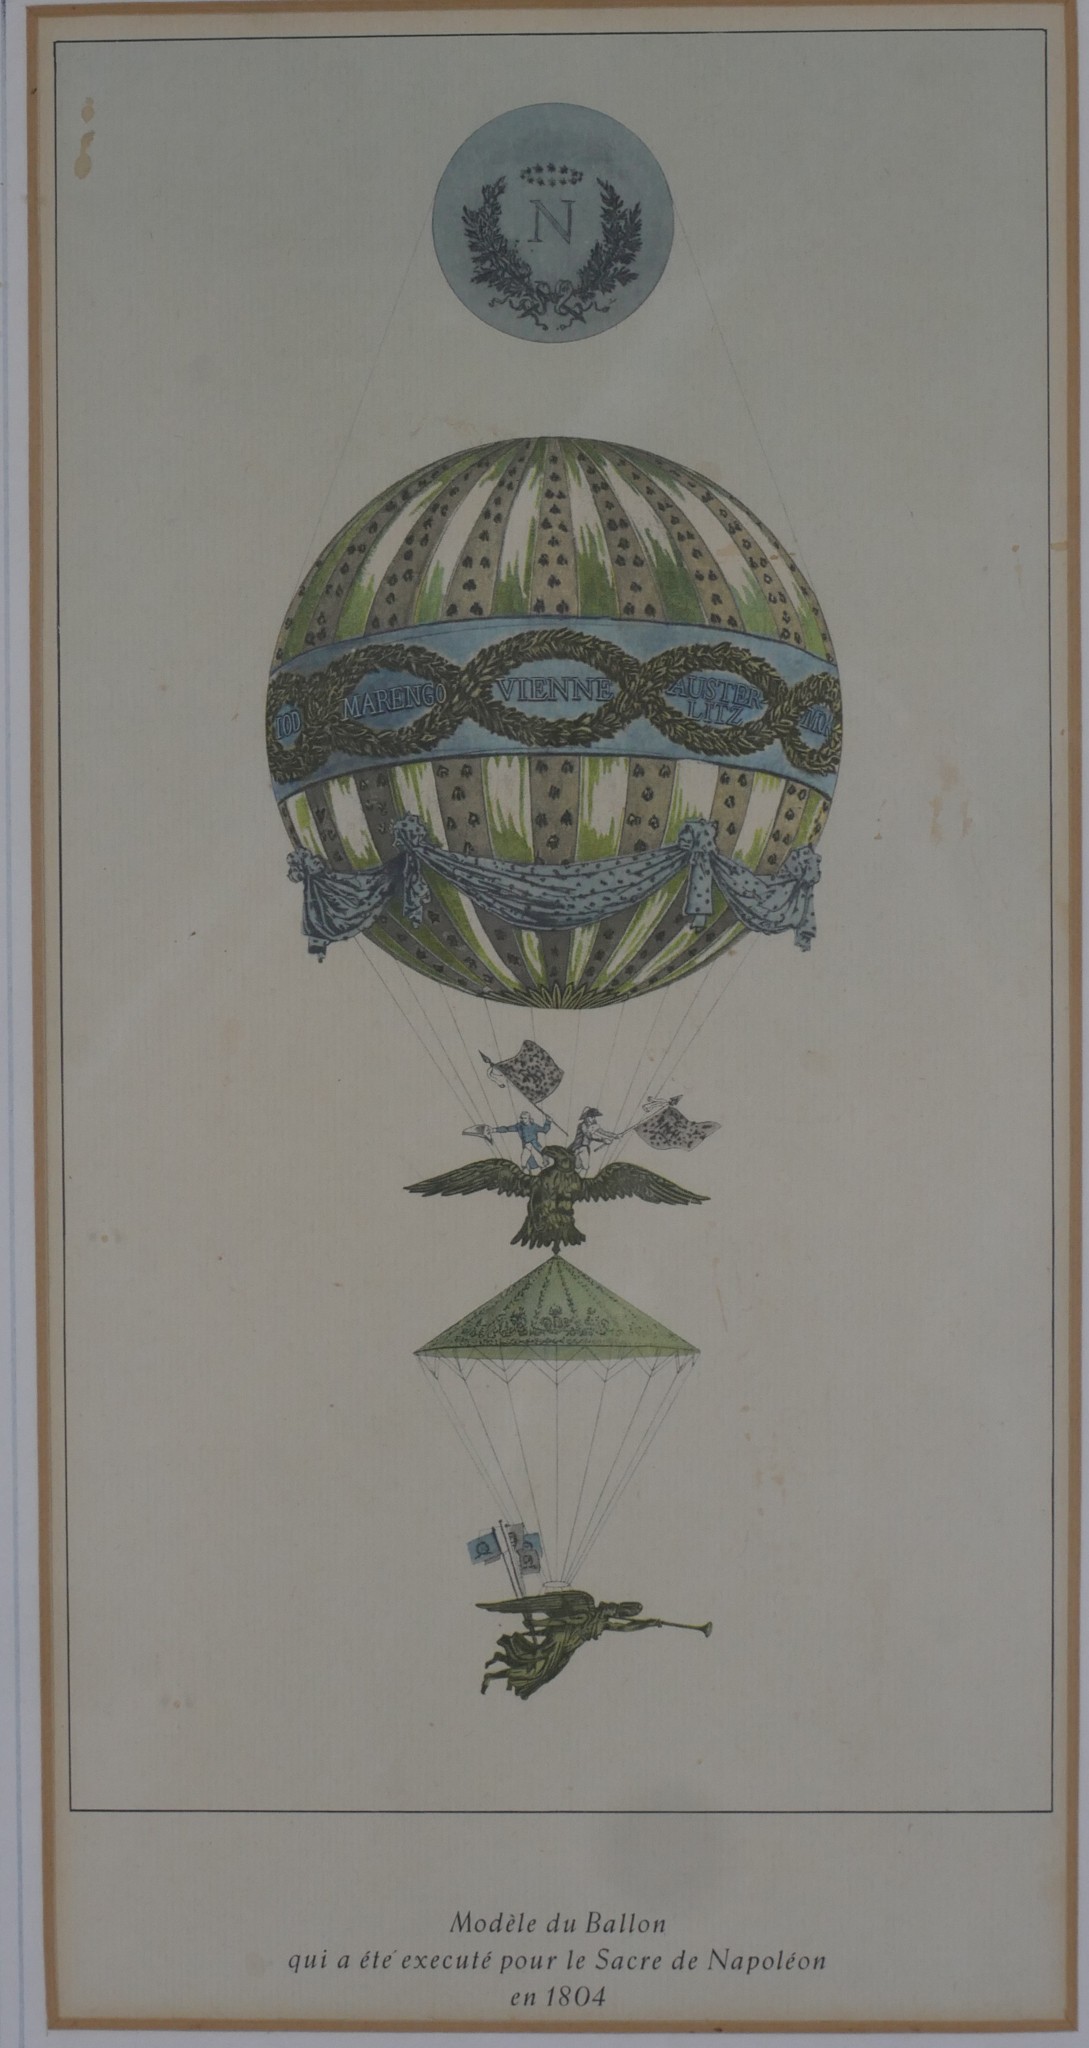 Ascent of James Sadler Two & Modele du Balloon two hot balloon related coloured prints, each - Image 6 of 6